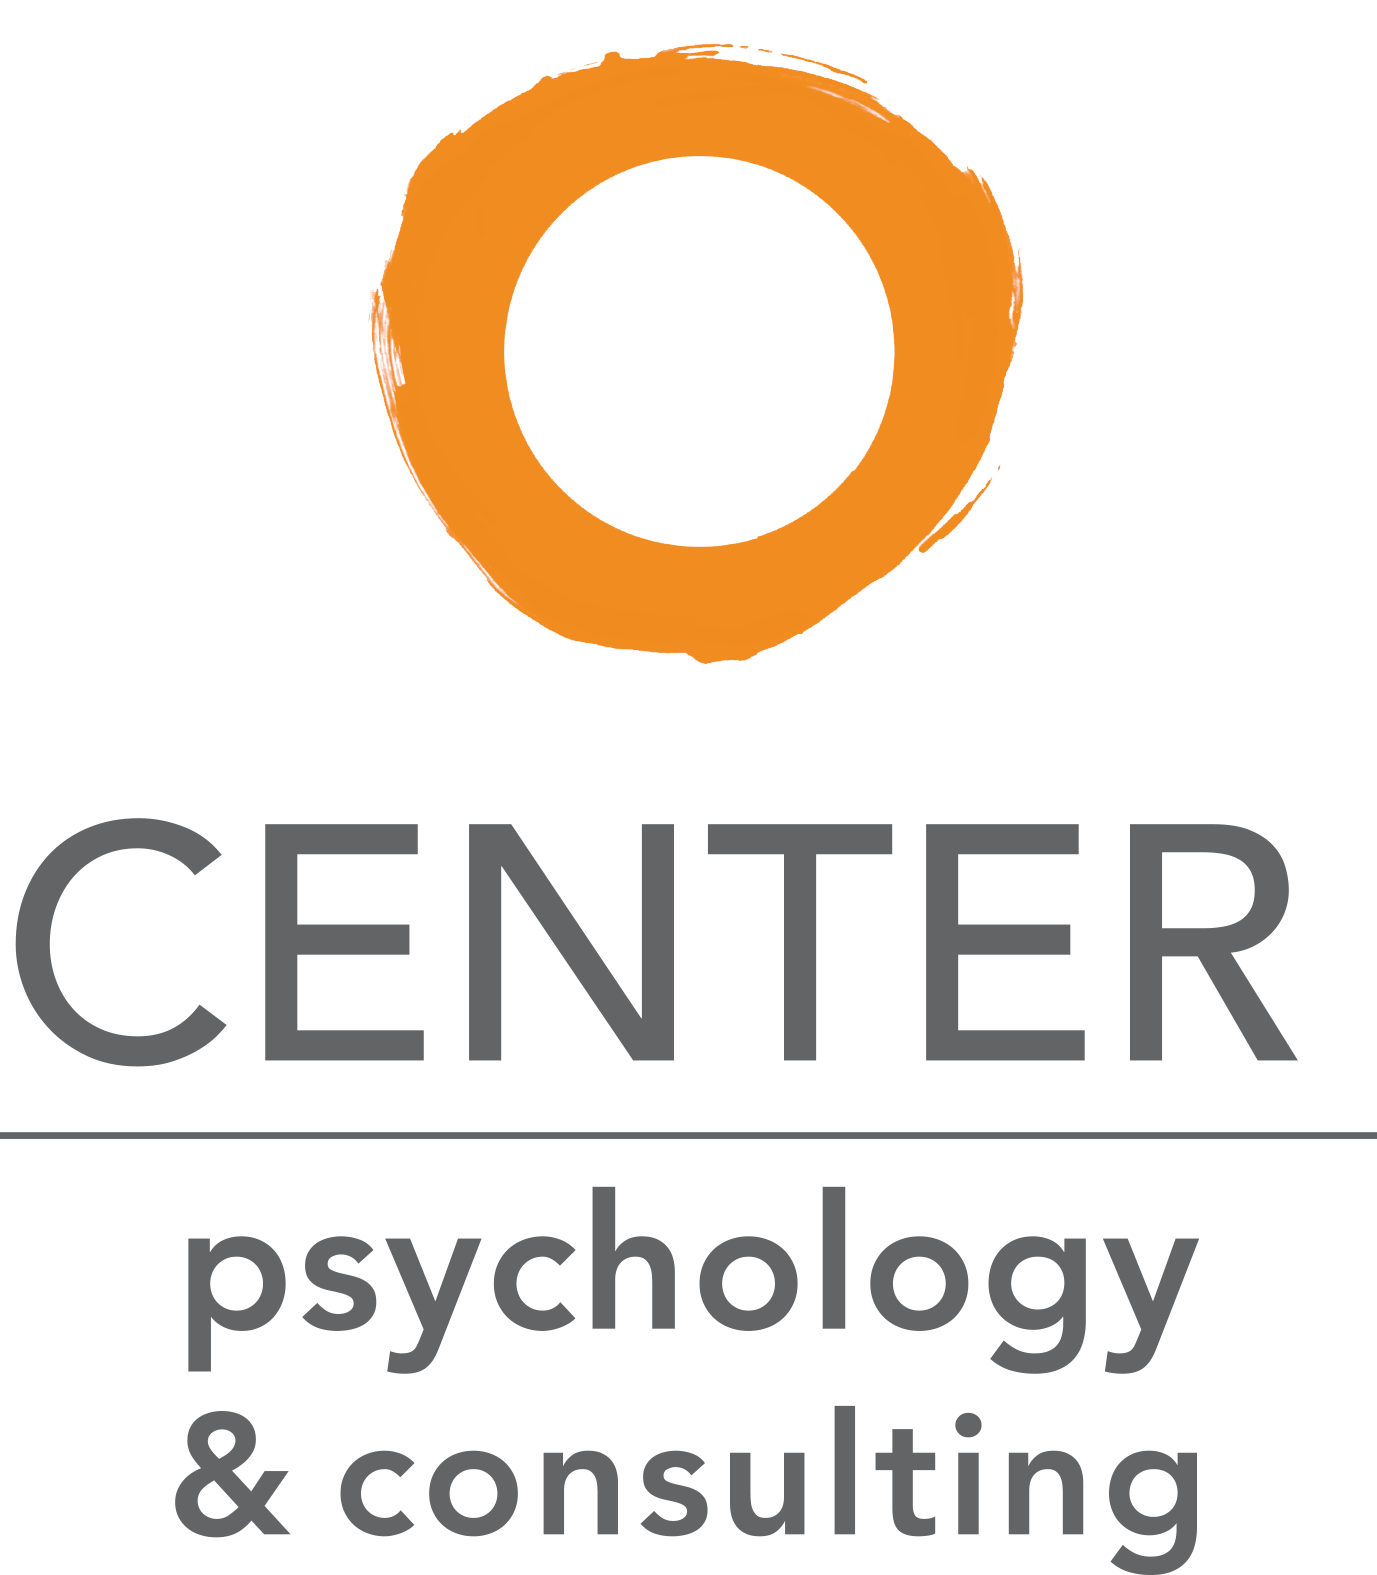 Center Psychology & Consulting